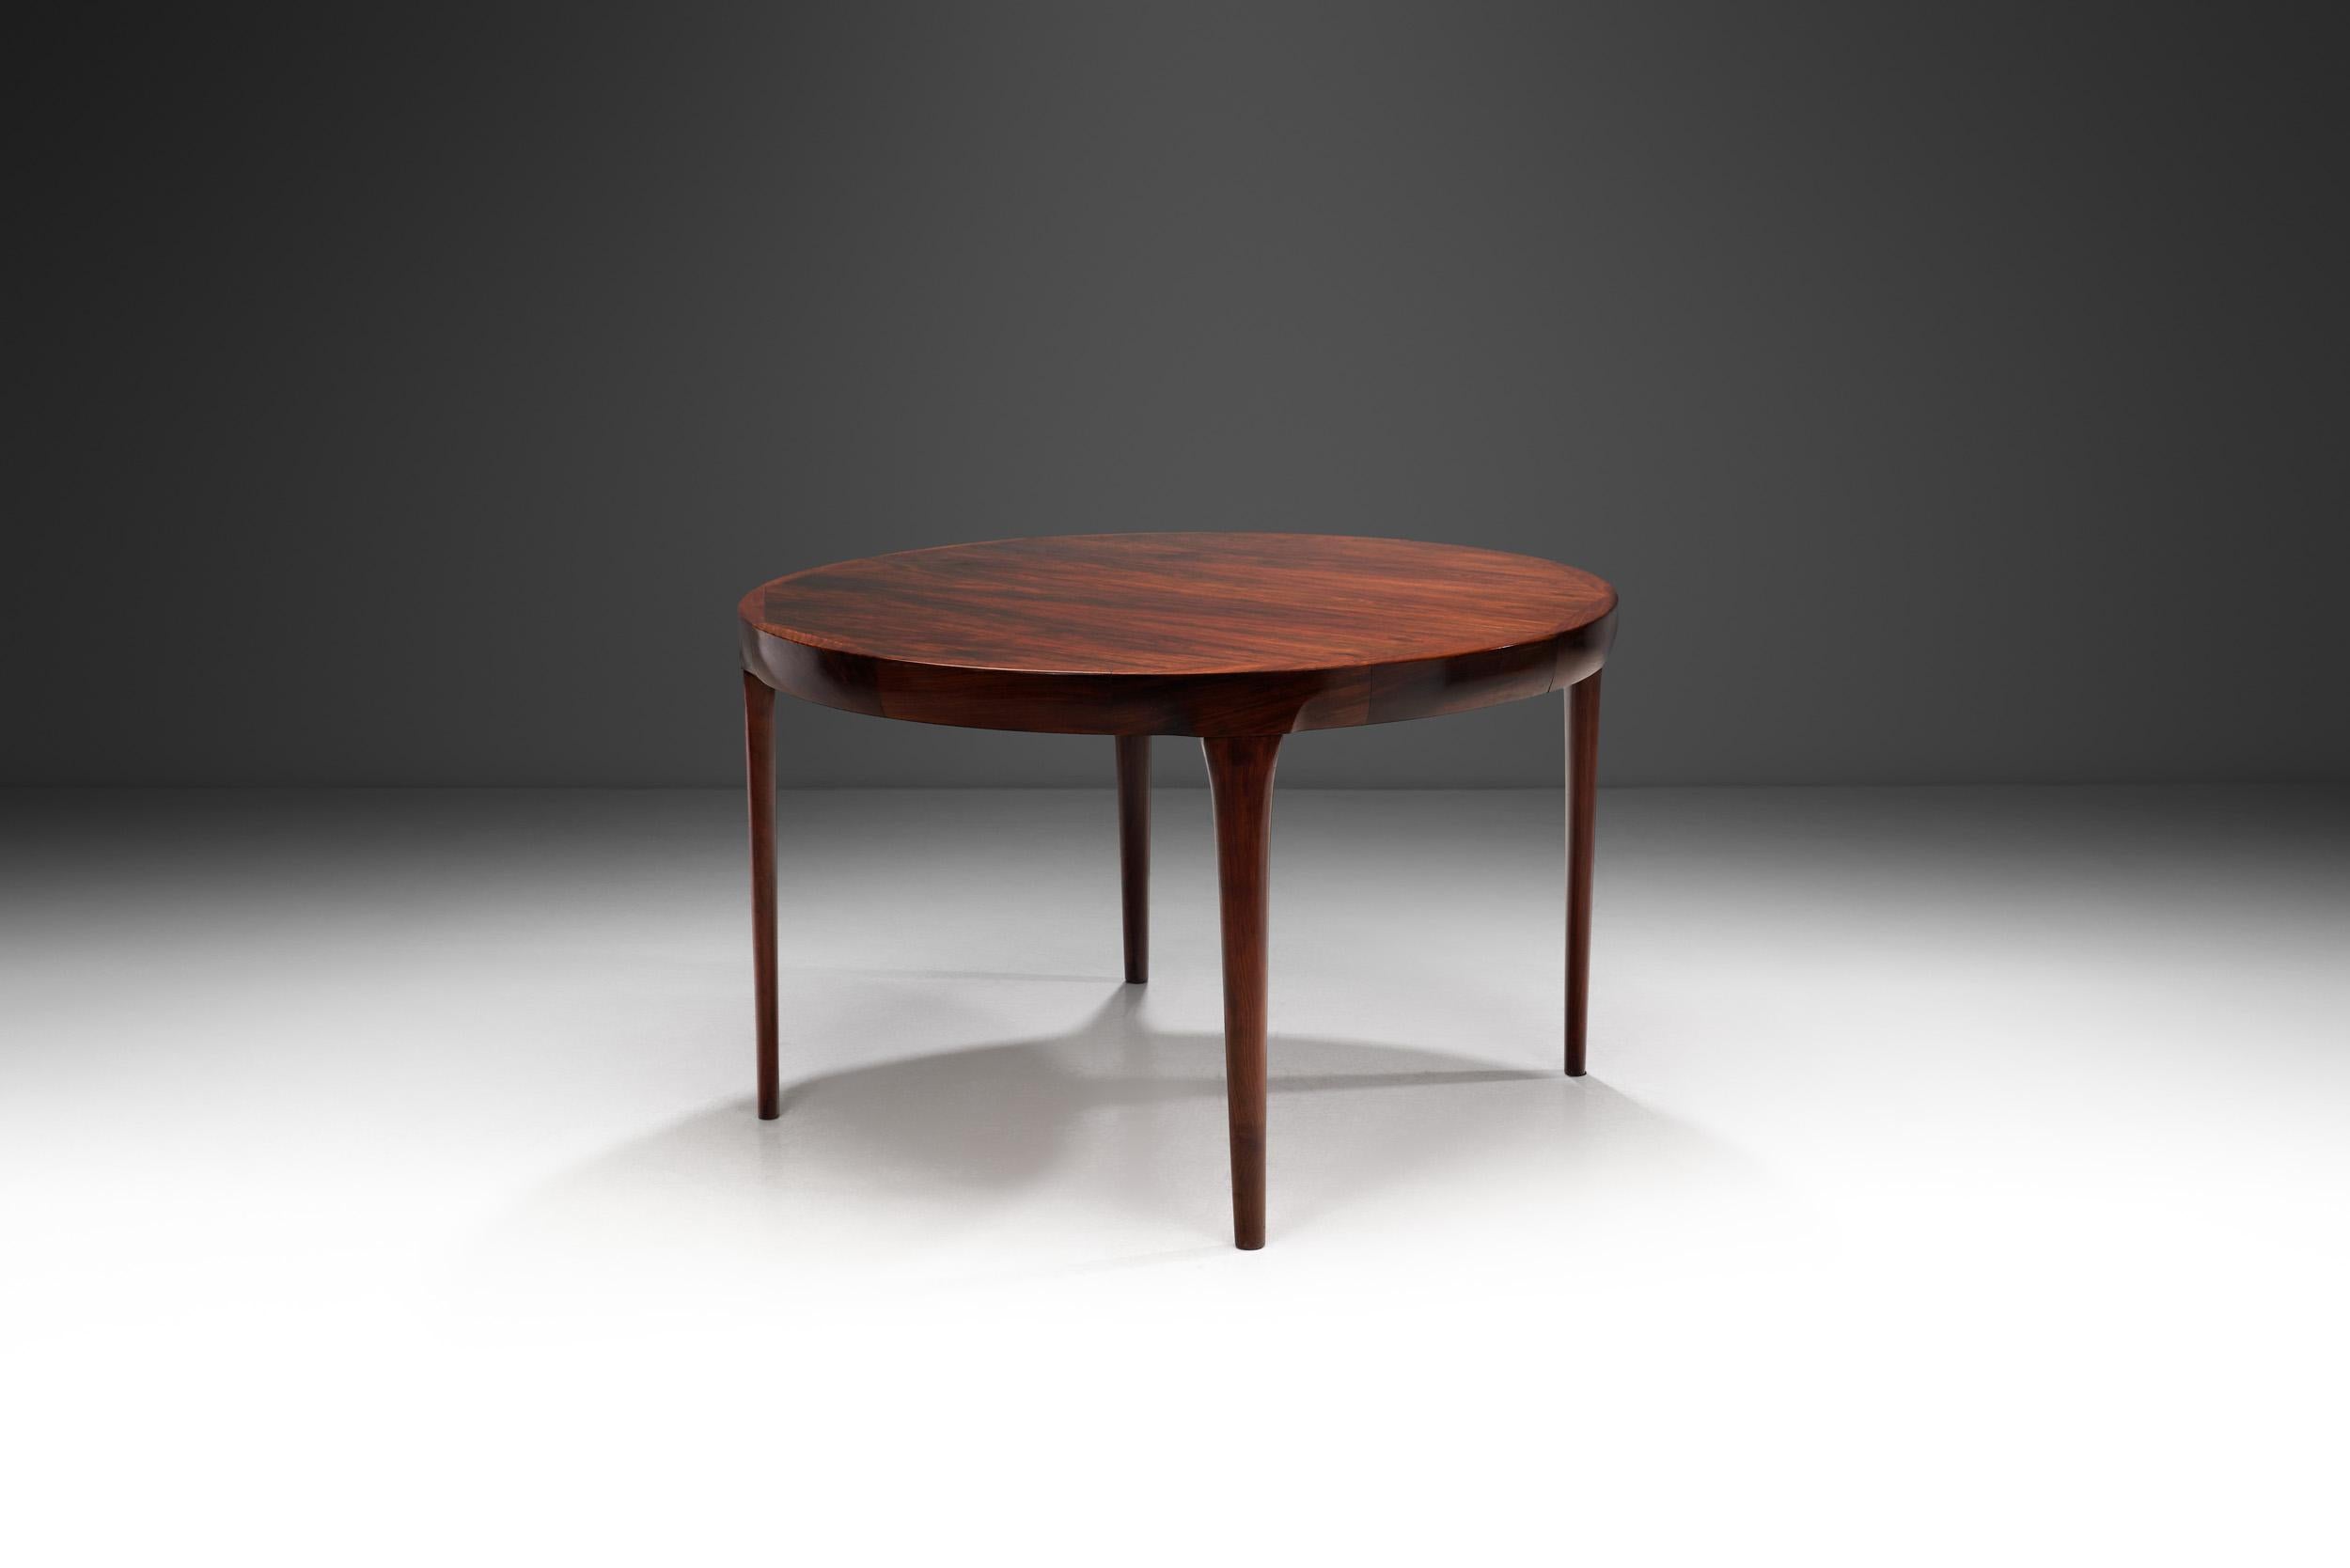 It was at Faarup Møbelfabrik where Danish designer, Ib Kofod-Larsen established himself as a renowned furniture designer. This beautiful, exotic wood dining table is a prime example why.

Many associate Danish furniture design with the country’s